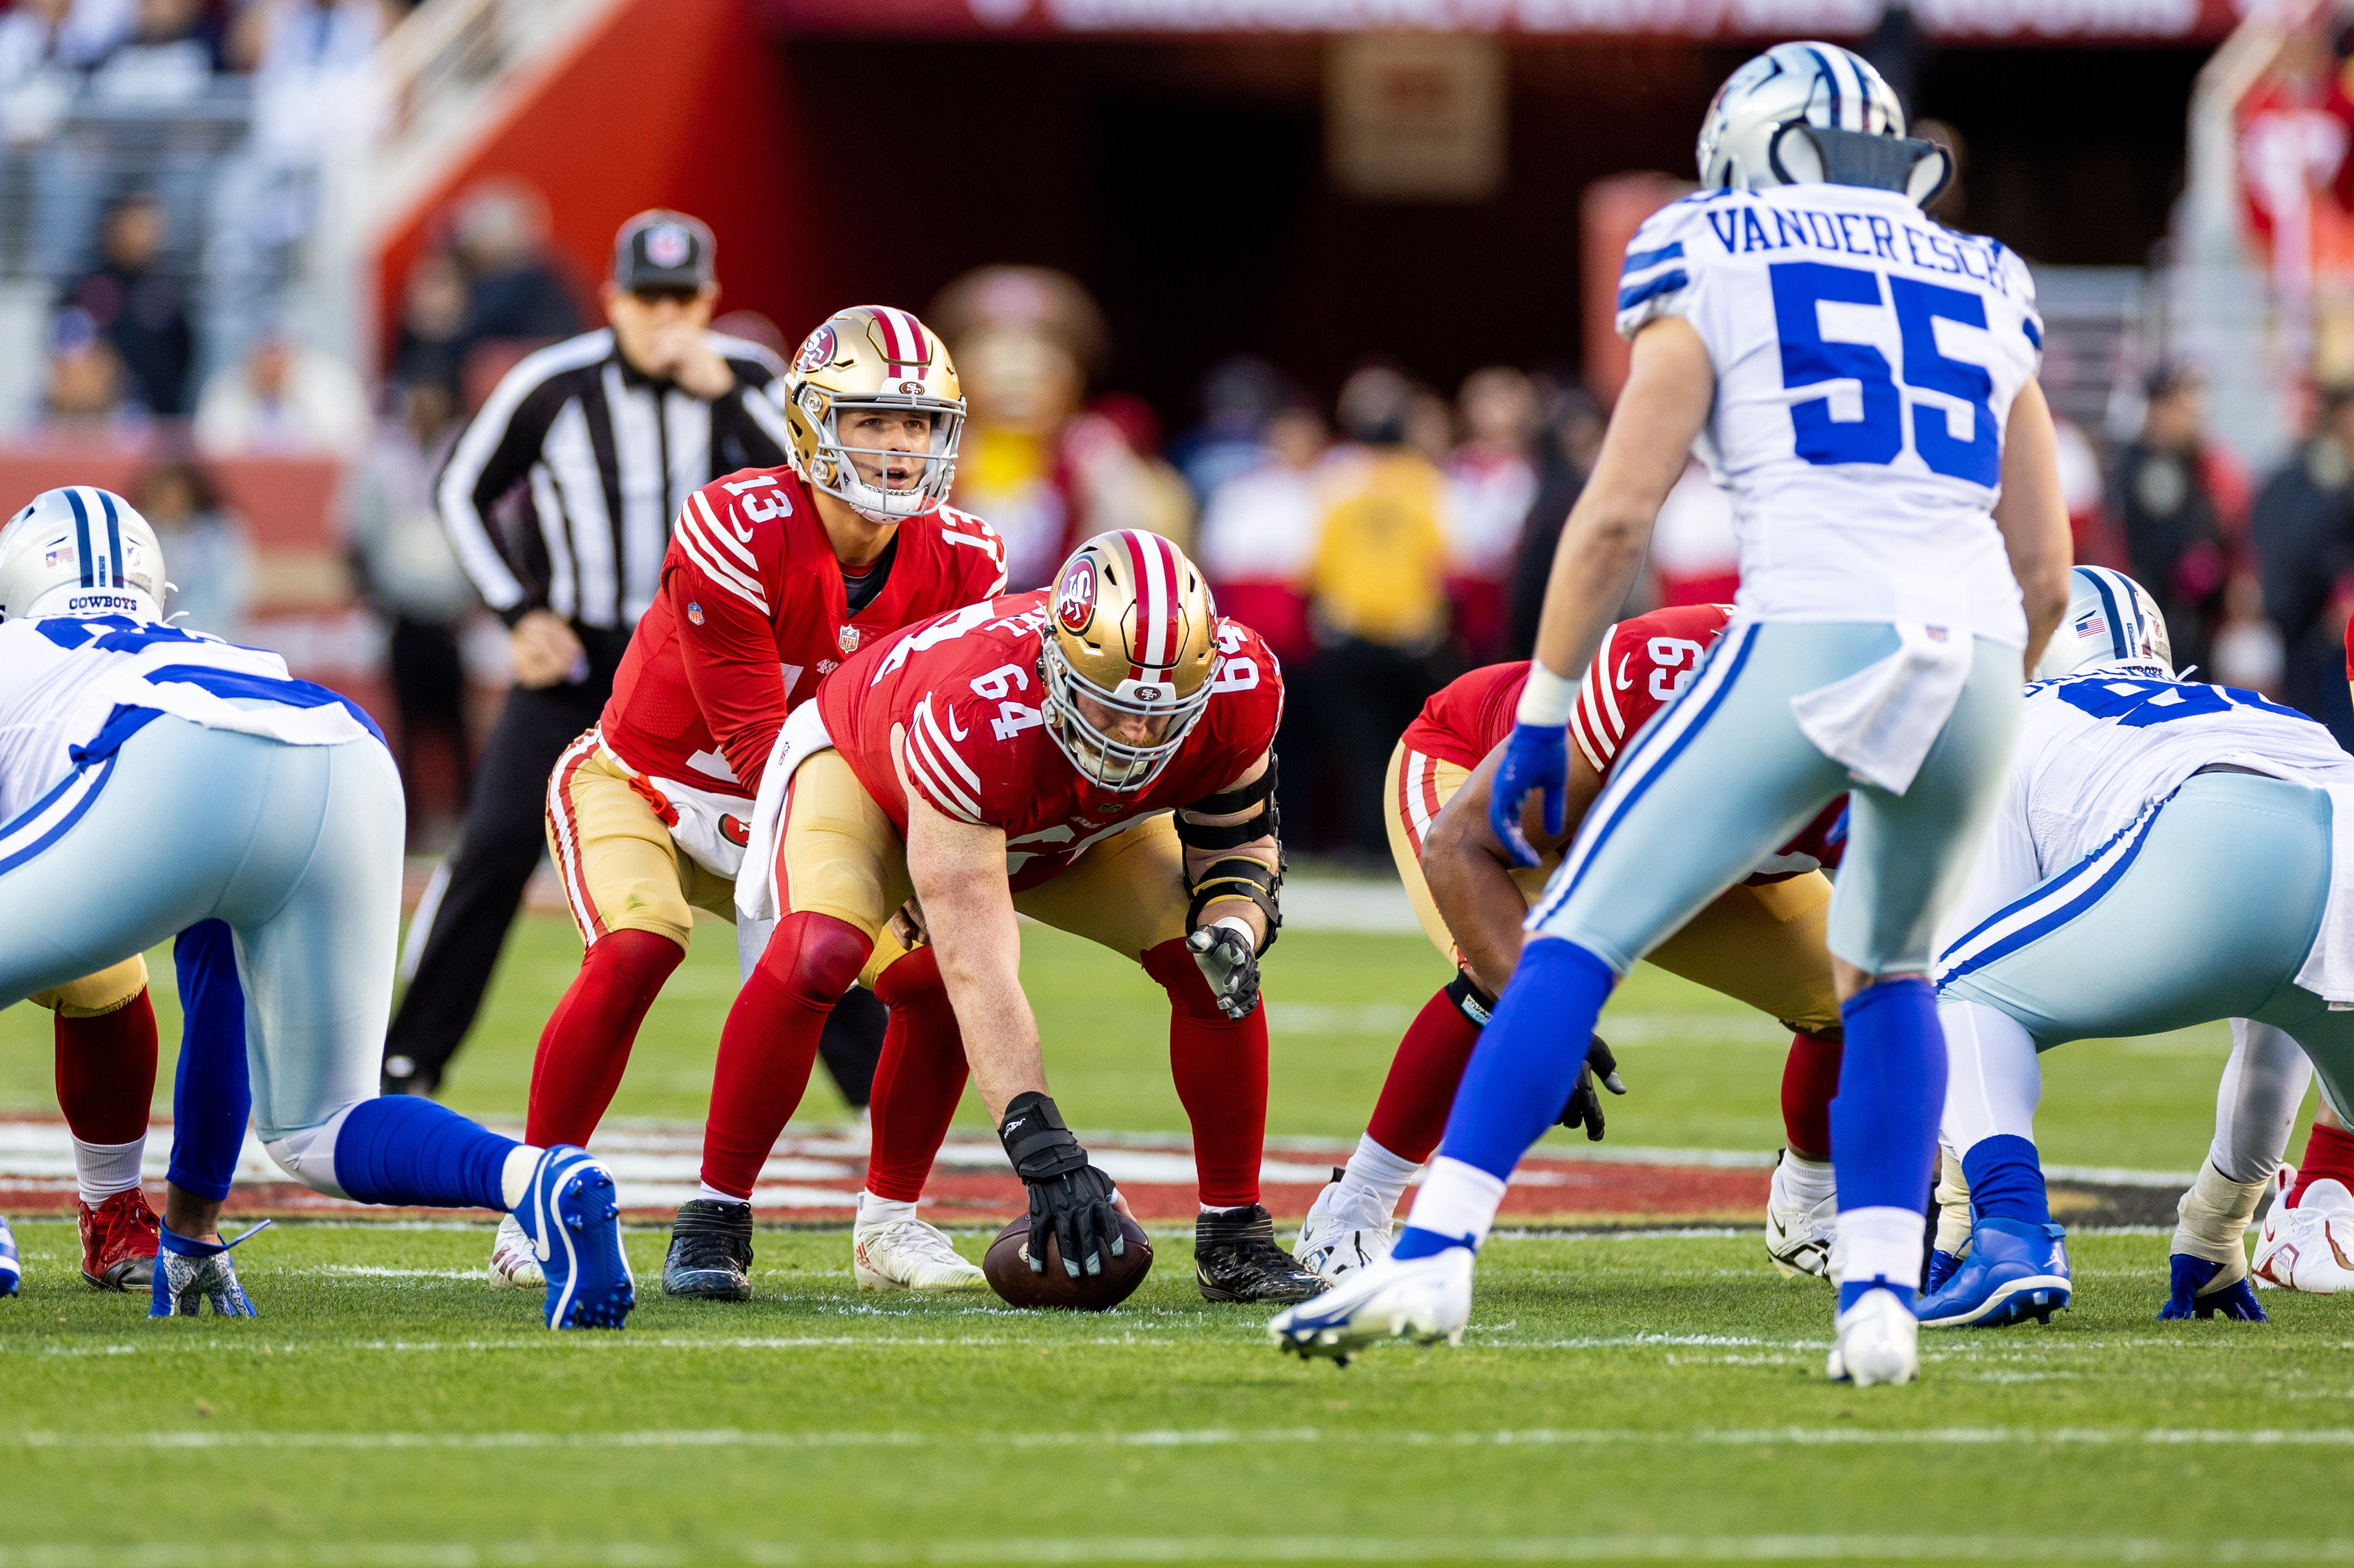 NFL: JAN 22 NFC Divisional Playoffs - TBD at 49ers